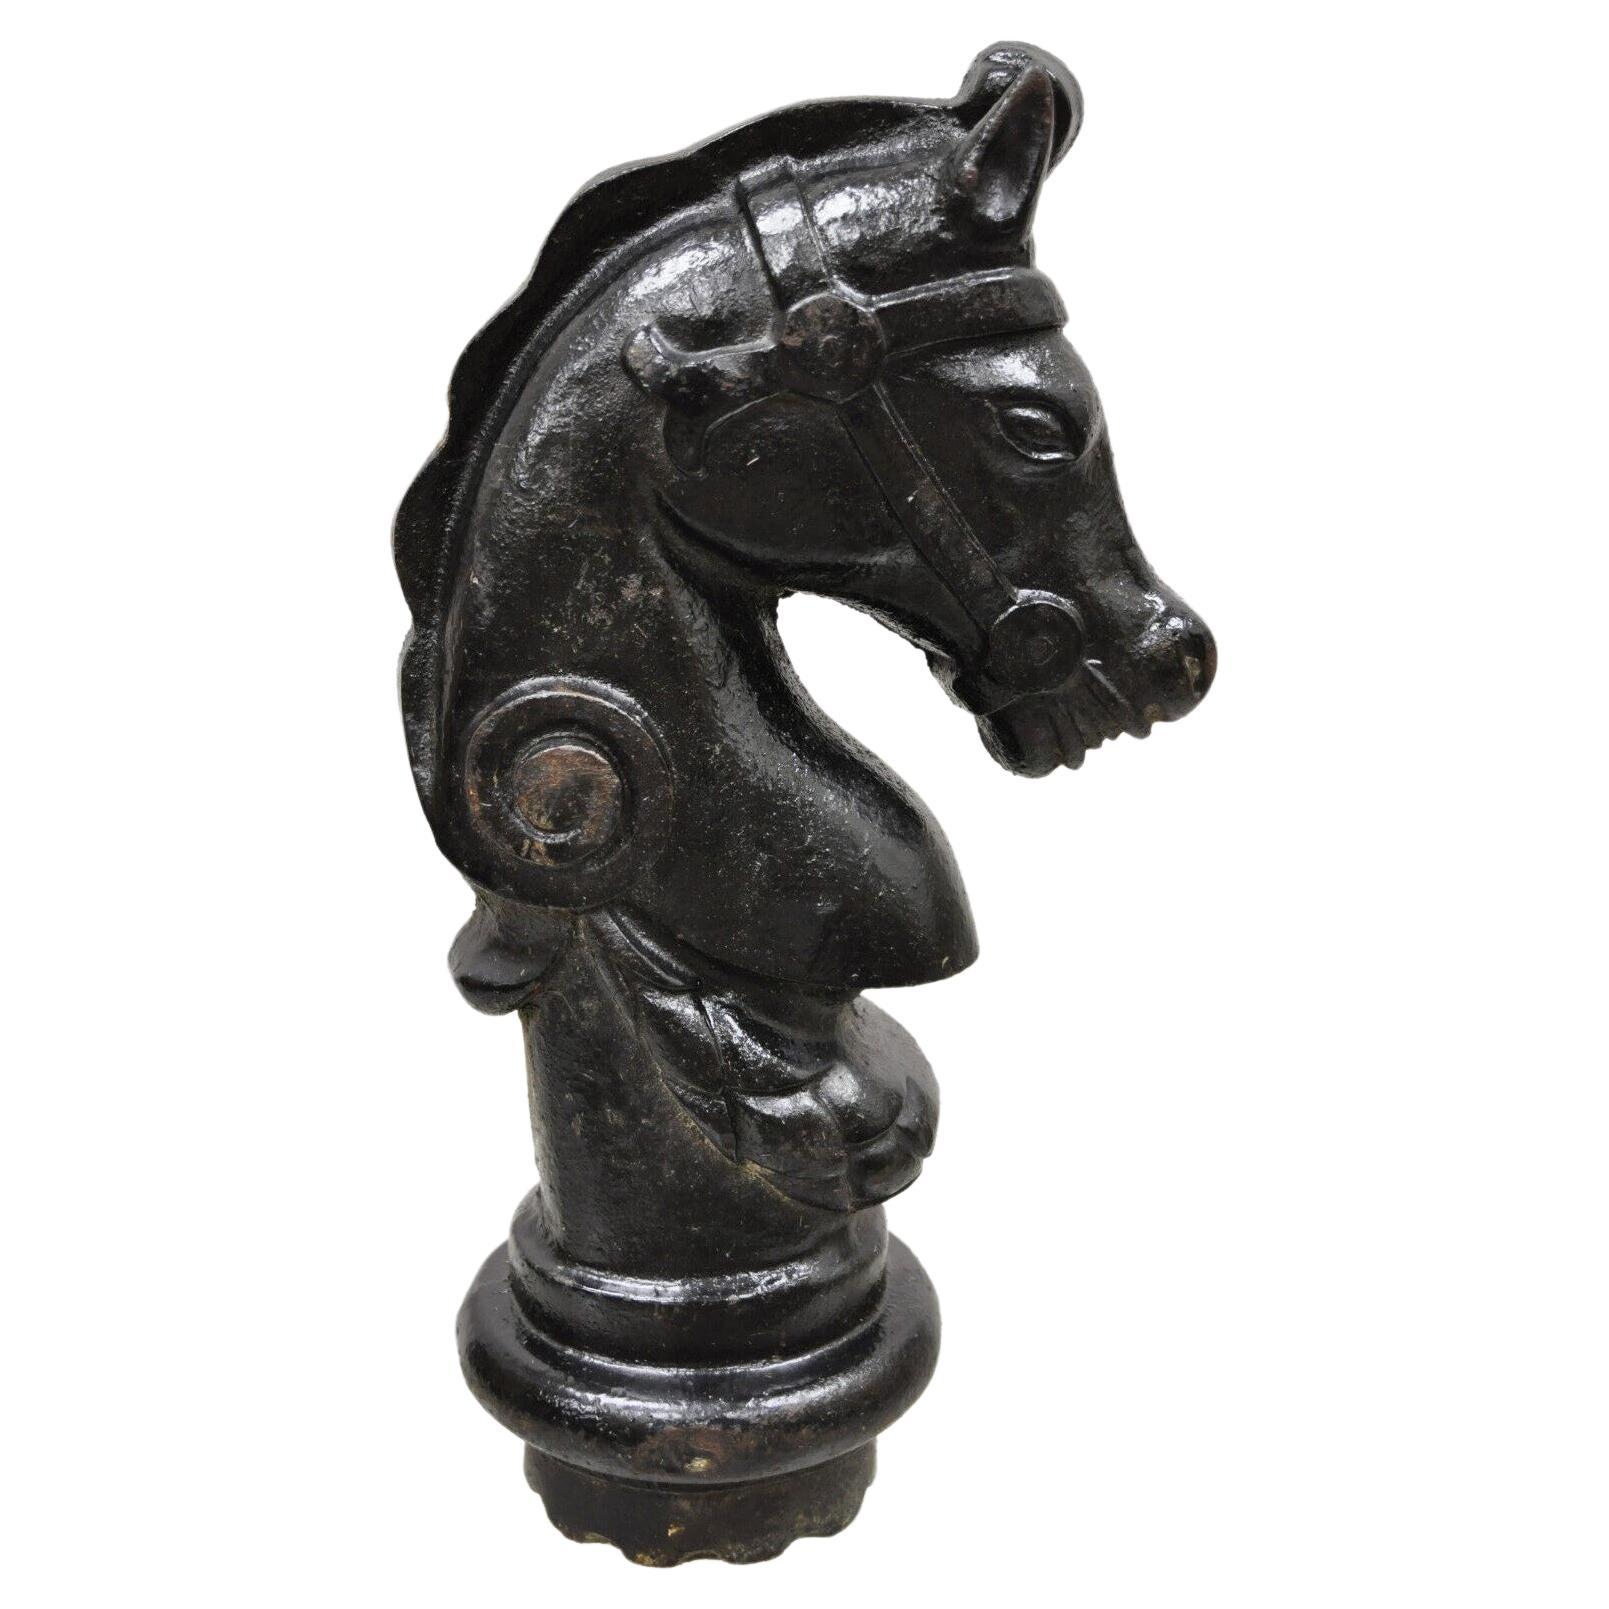 Antique 19th Century Cast Iron Horse Head Hitching Post Early American (A)